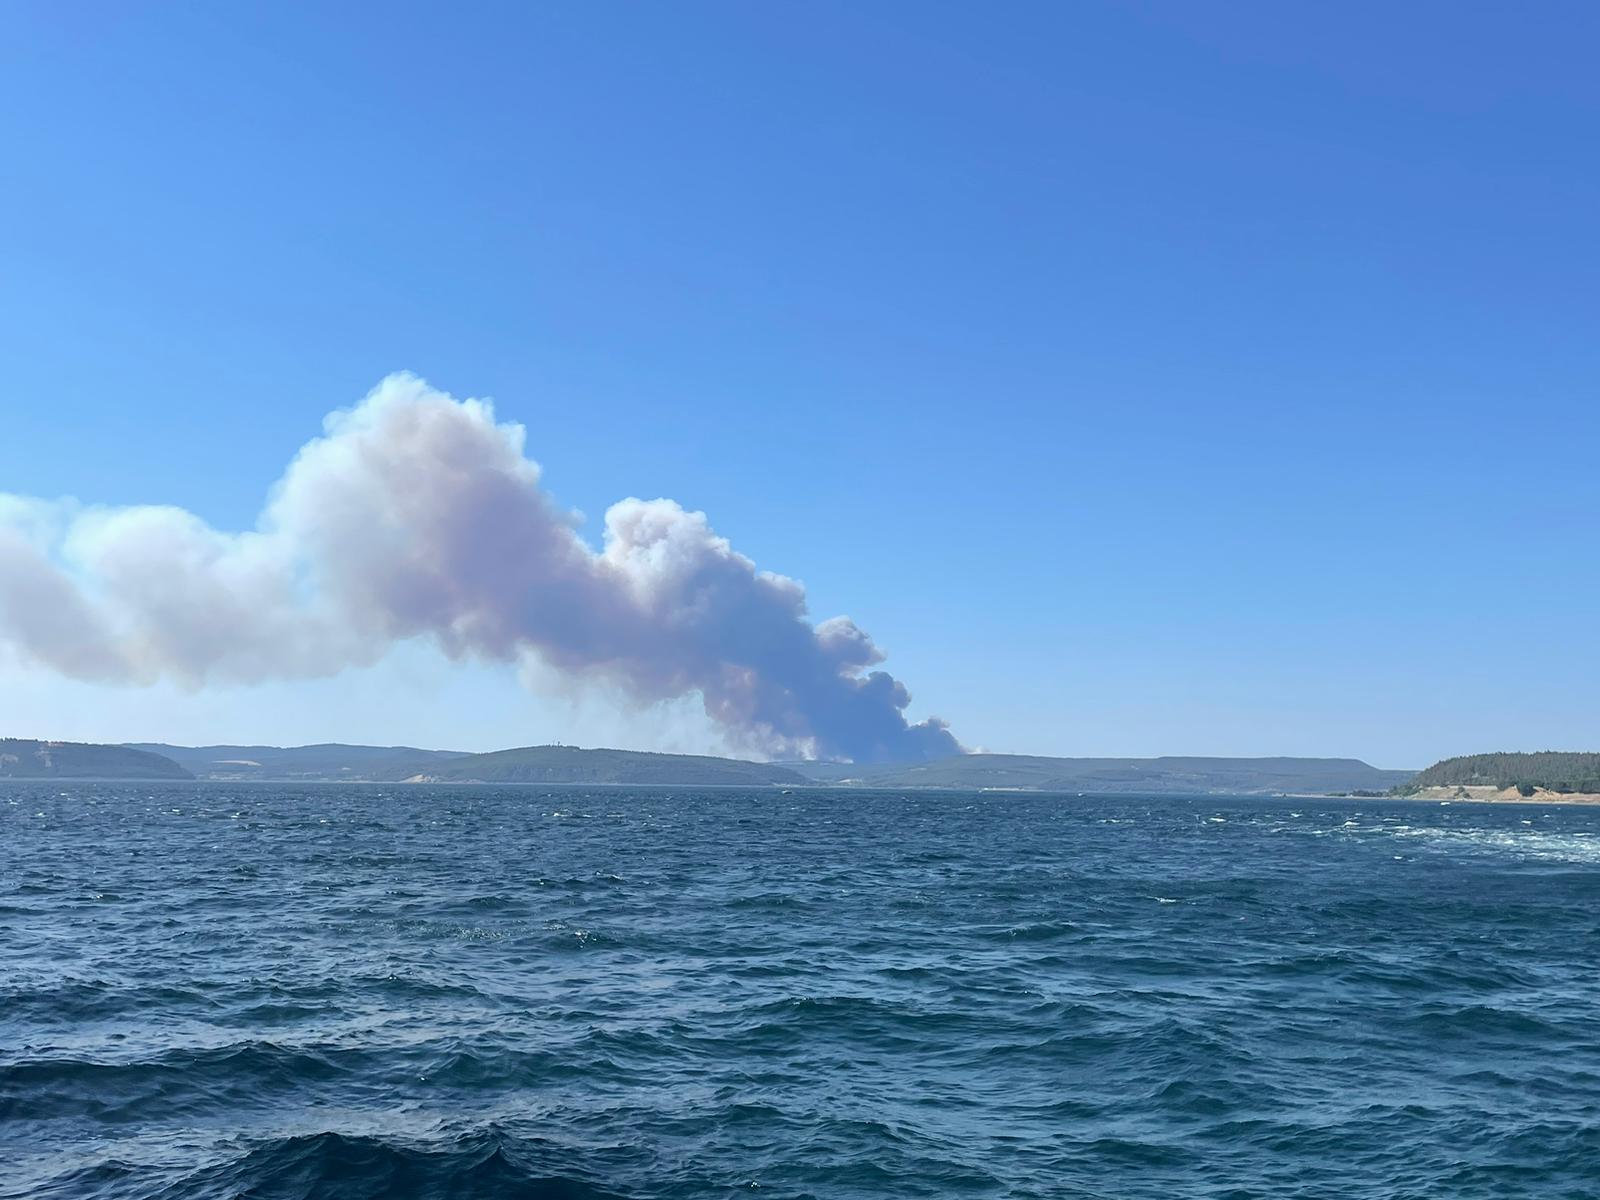 aa-20240618-34912066-34912065-oneway-ship-traffic-in-the-canakkale-strait-was-suspended-due-to-forest-fire.jpg